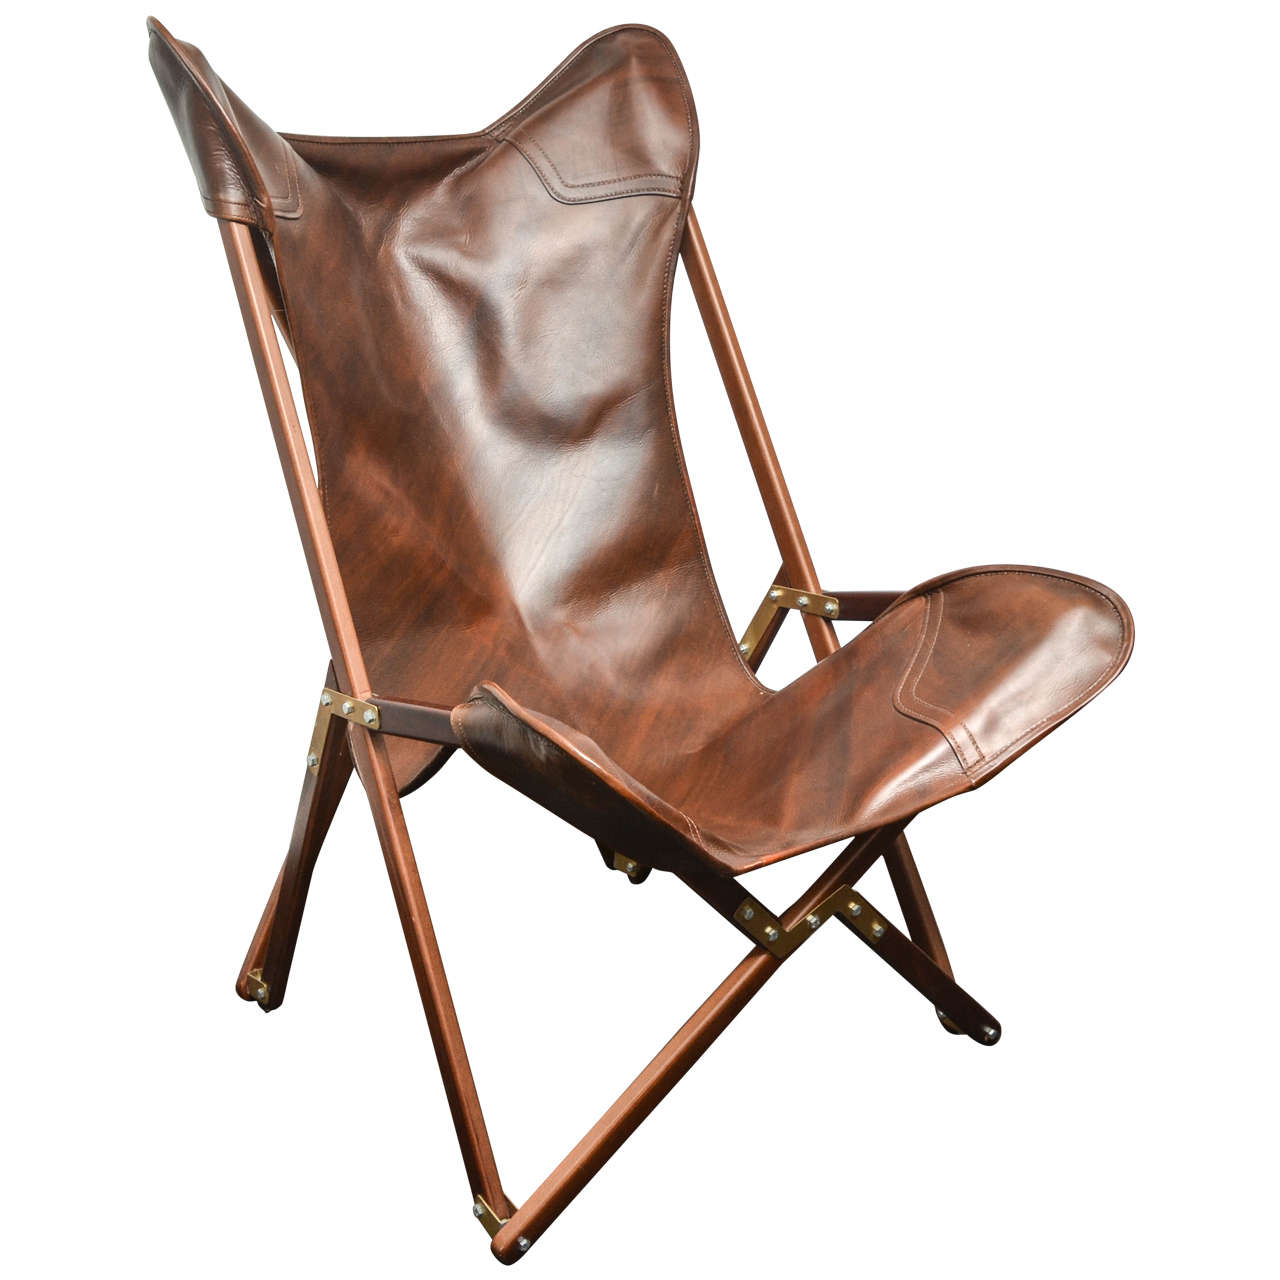 Contemporary Leather "Campaign" Chair